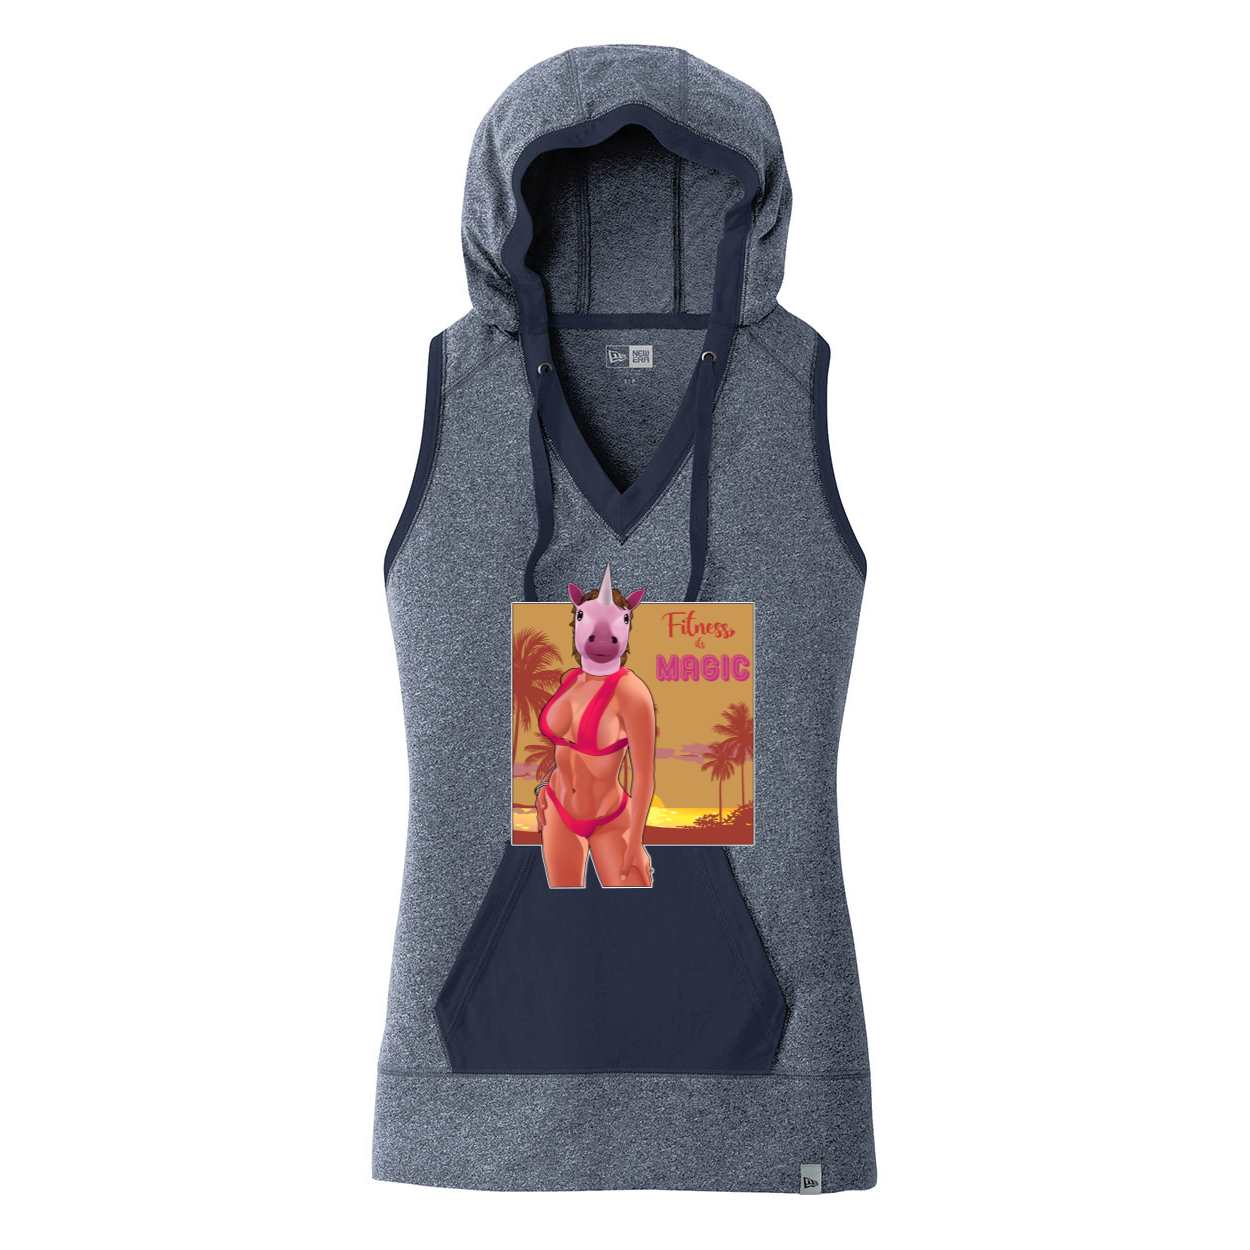 Fitness Its Magic Hoodie Tank - AnimePhysique